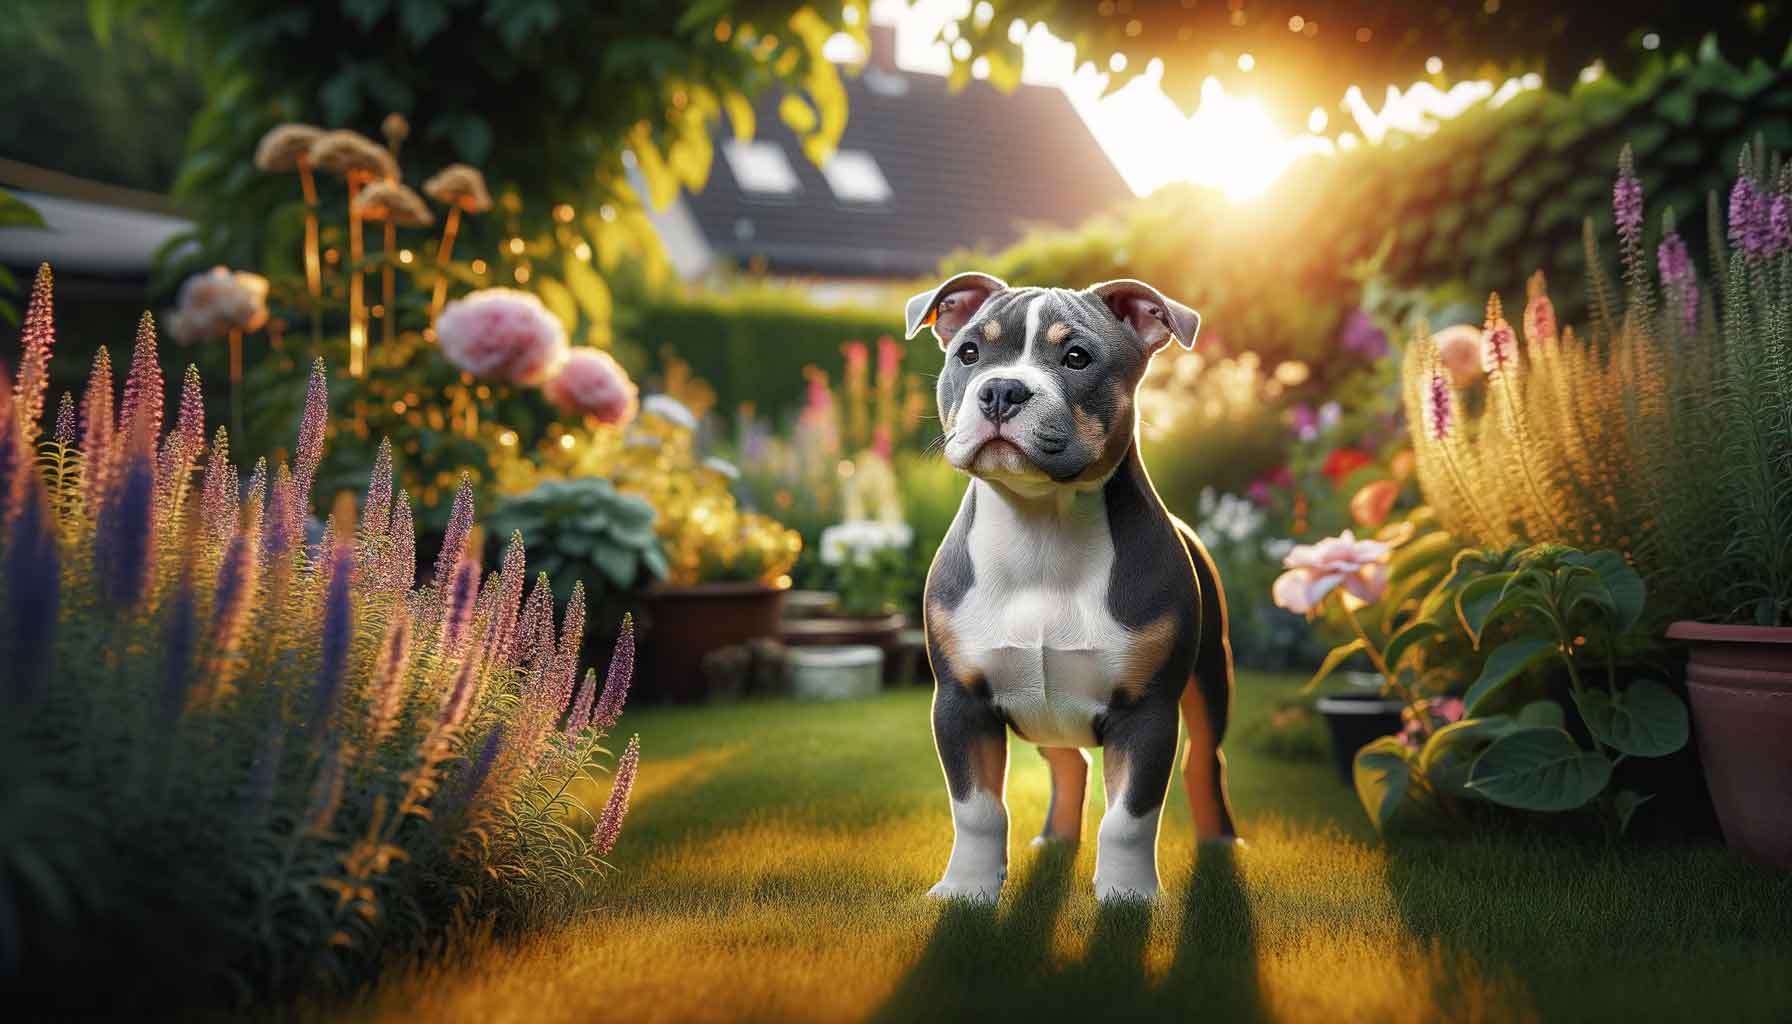 Lilac Tri Micro Bully with a tri-color coat standing in a vibrant garden illuminated by the golden hour light.